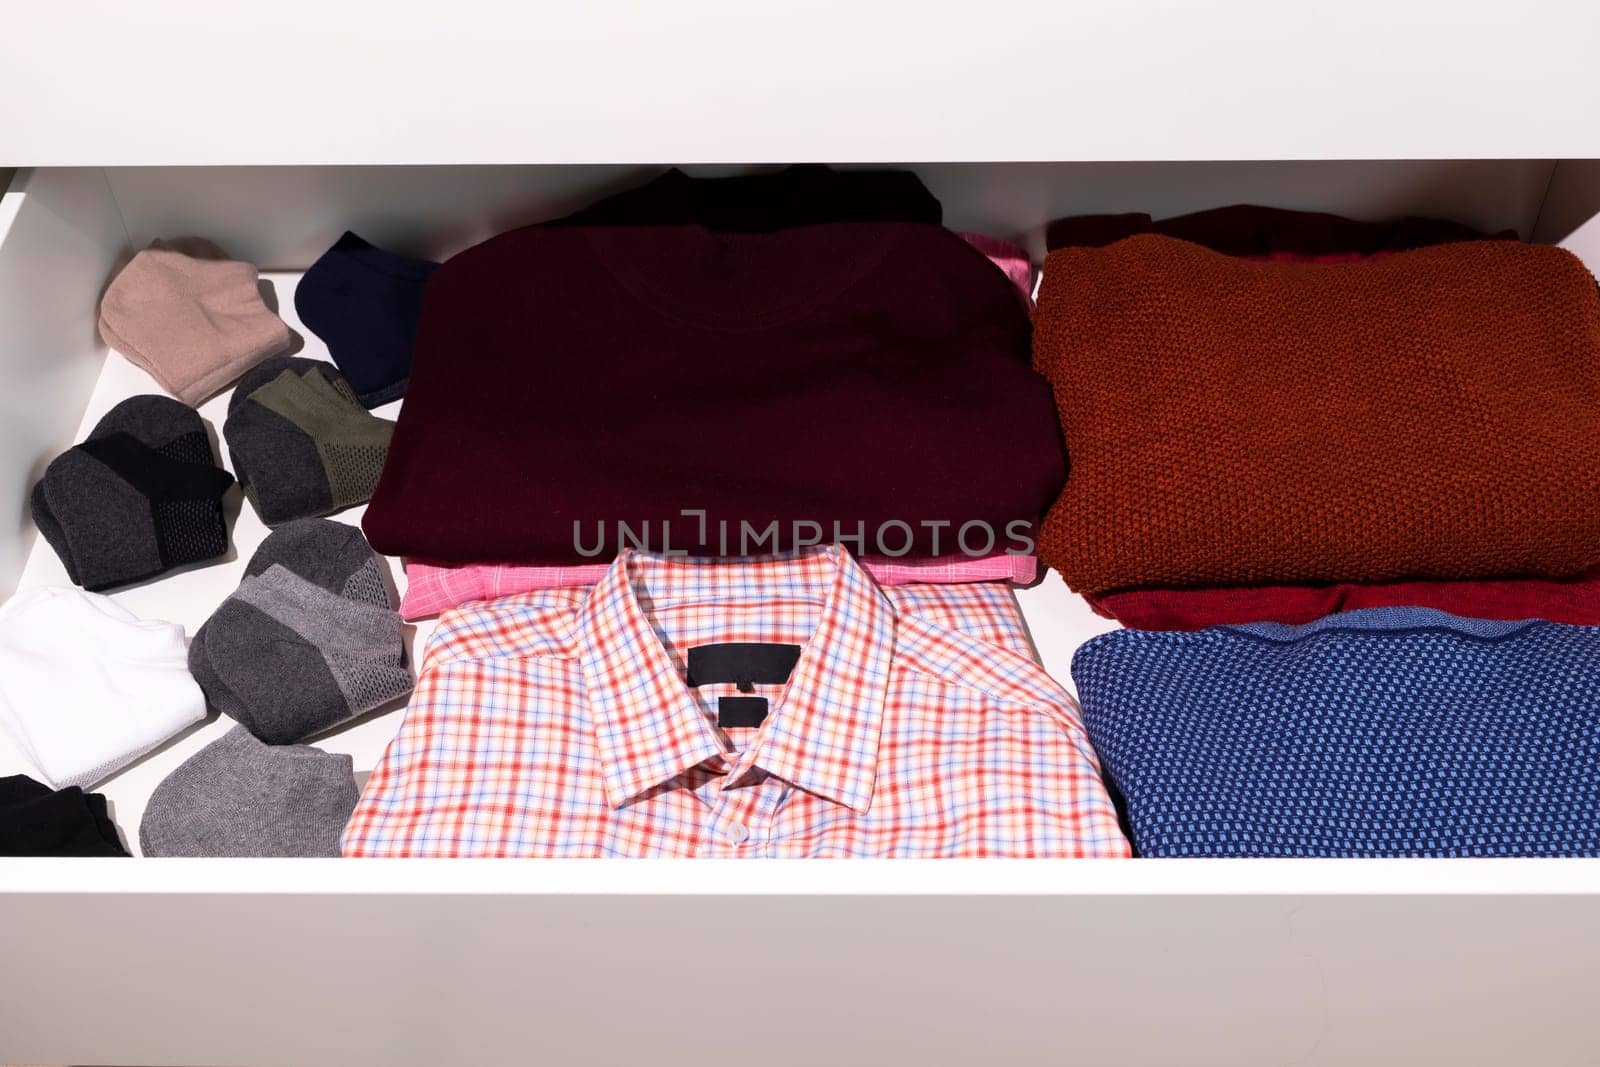 Shelf With Male Warm Clothes, Outfit in Drawer Of Closet. Folded Fresh Shirt, Sweaters, Socks. Man's Clothing Storage. Wardrobes And Cabinetry. National Clean Your Room Day. Horizontal Plane